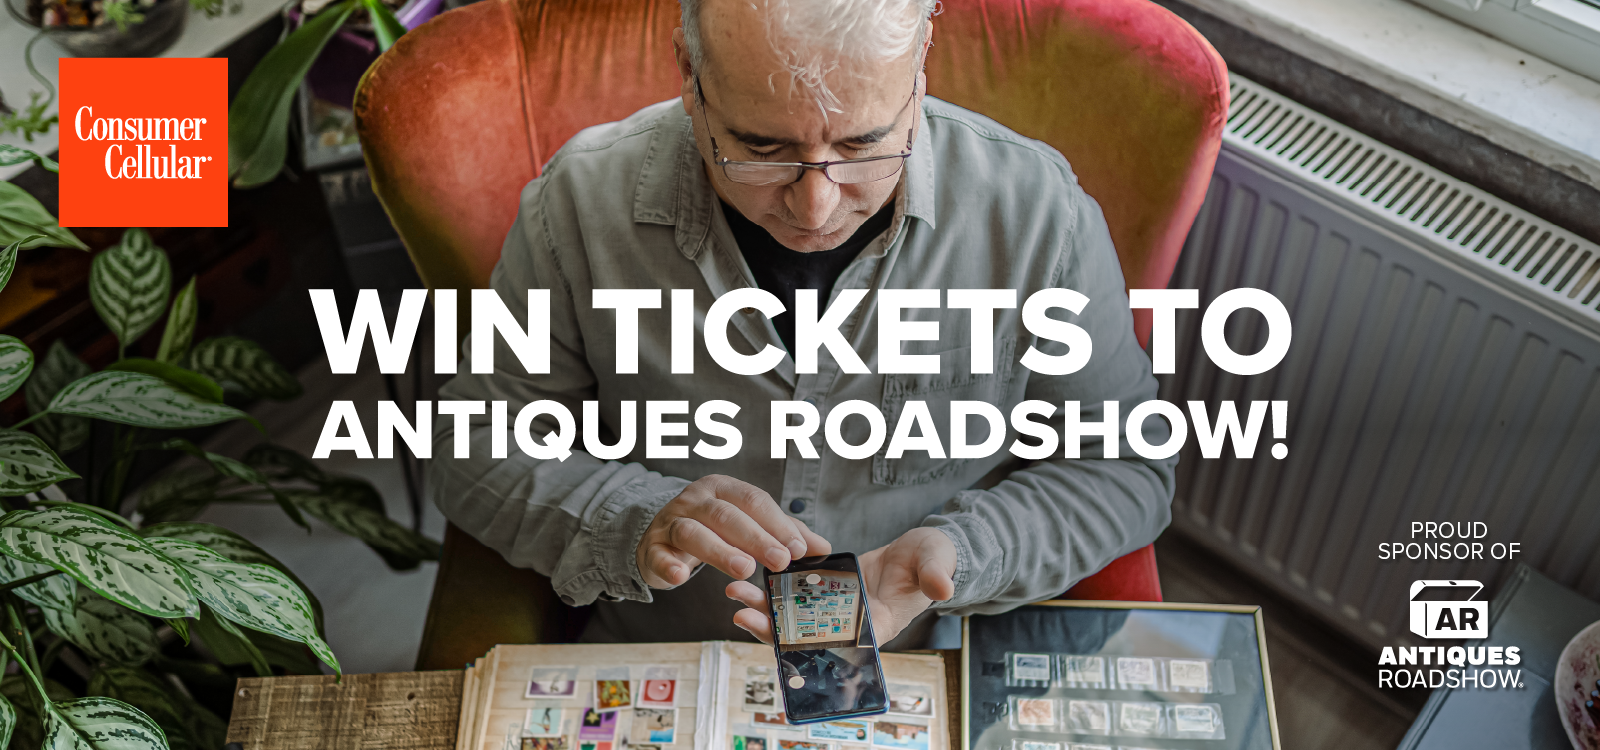 Enter to Win Tickets to Antiques Roadshow! Our Blog